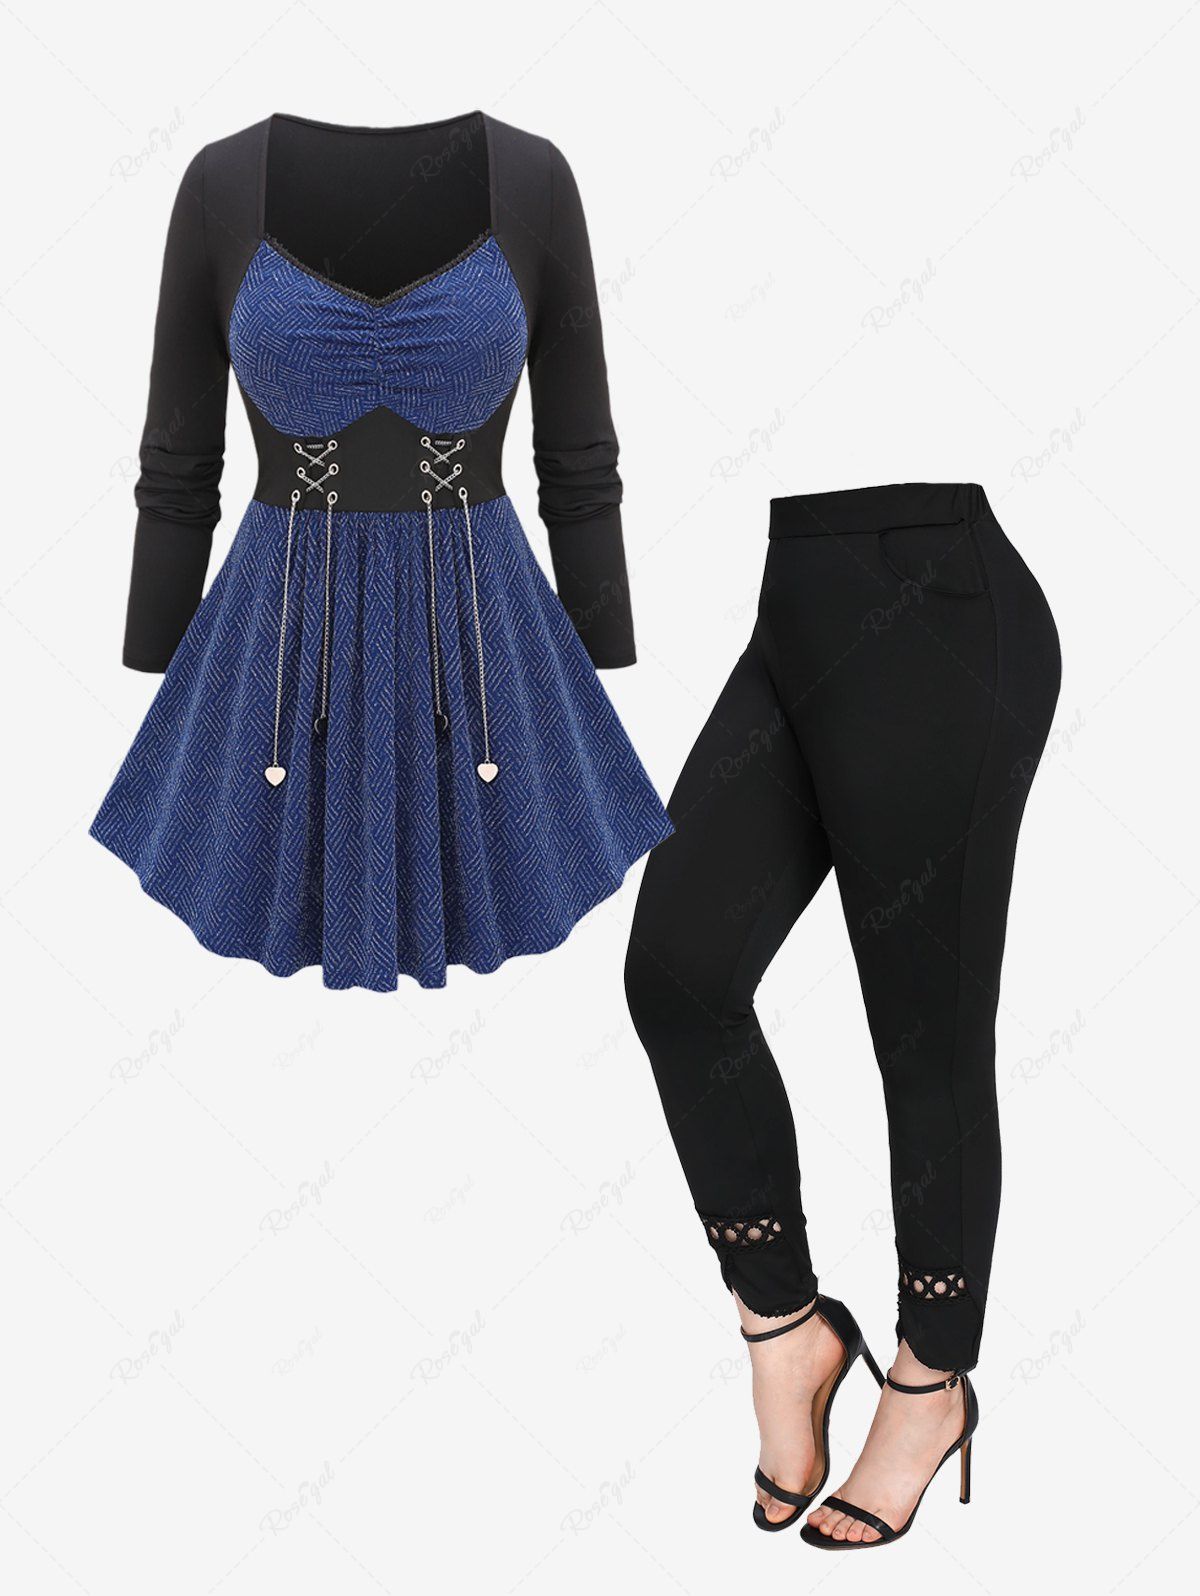 Fashion Chain Lace Up Two Tone Knitted Corset Top and Skinny Leggings Plus Size Outfit  